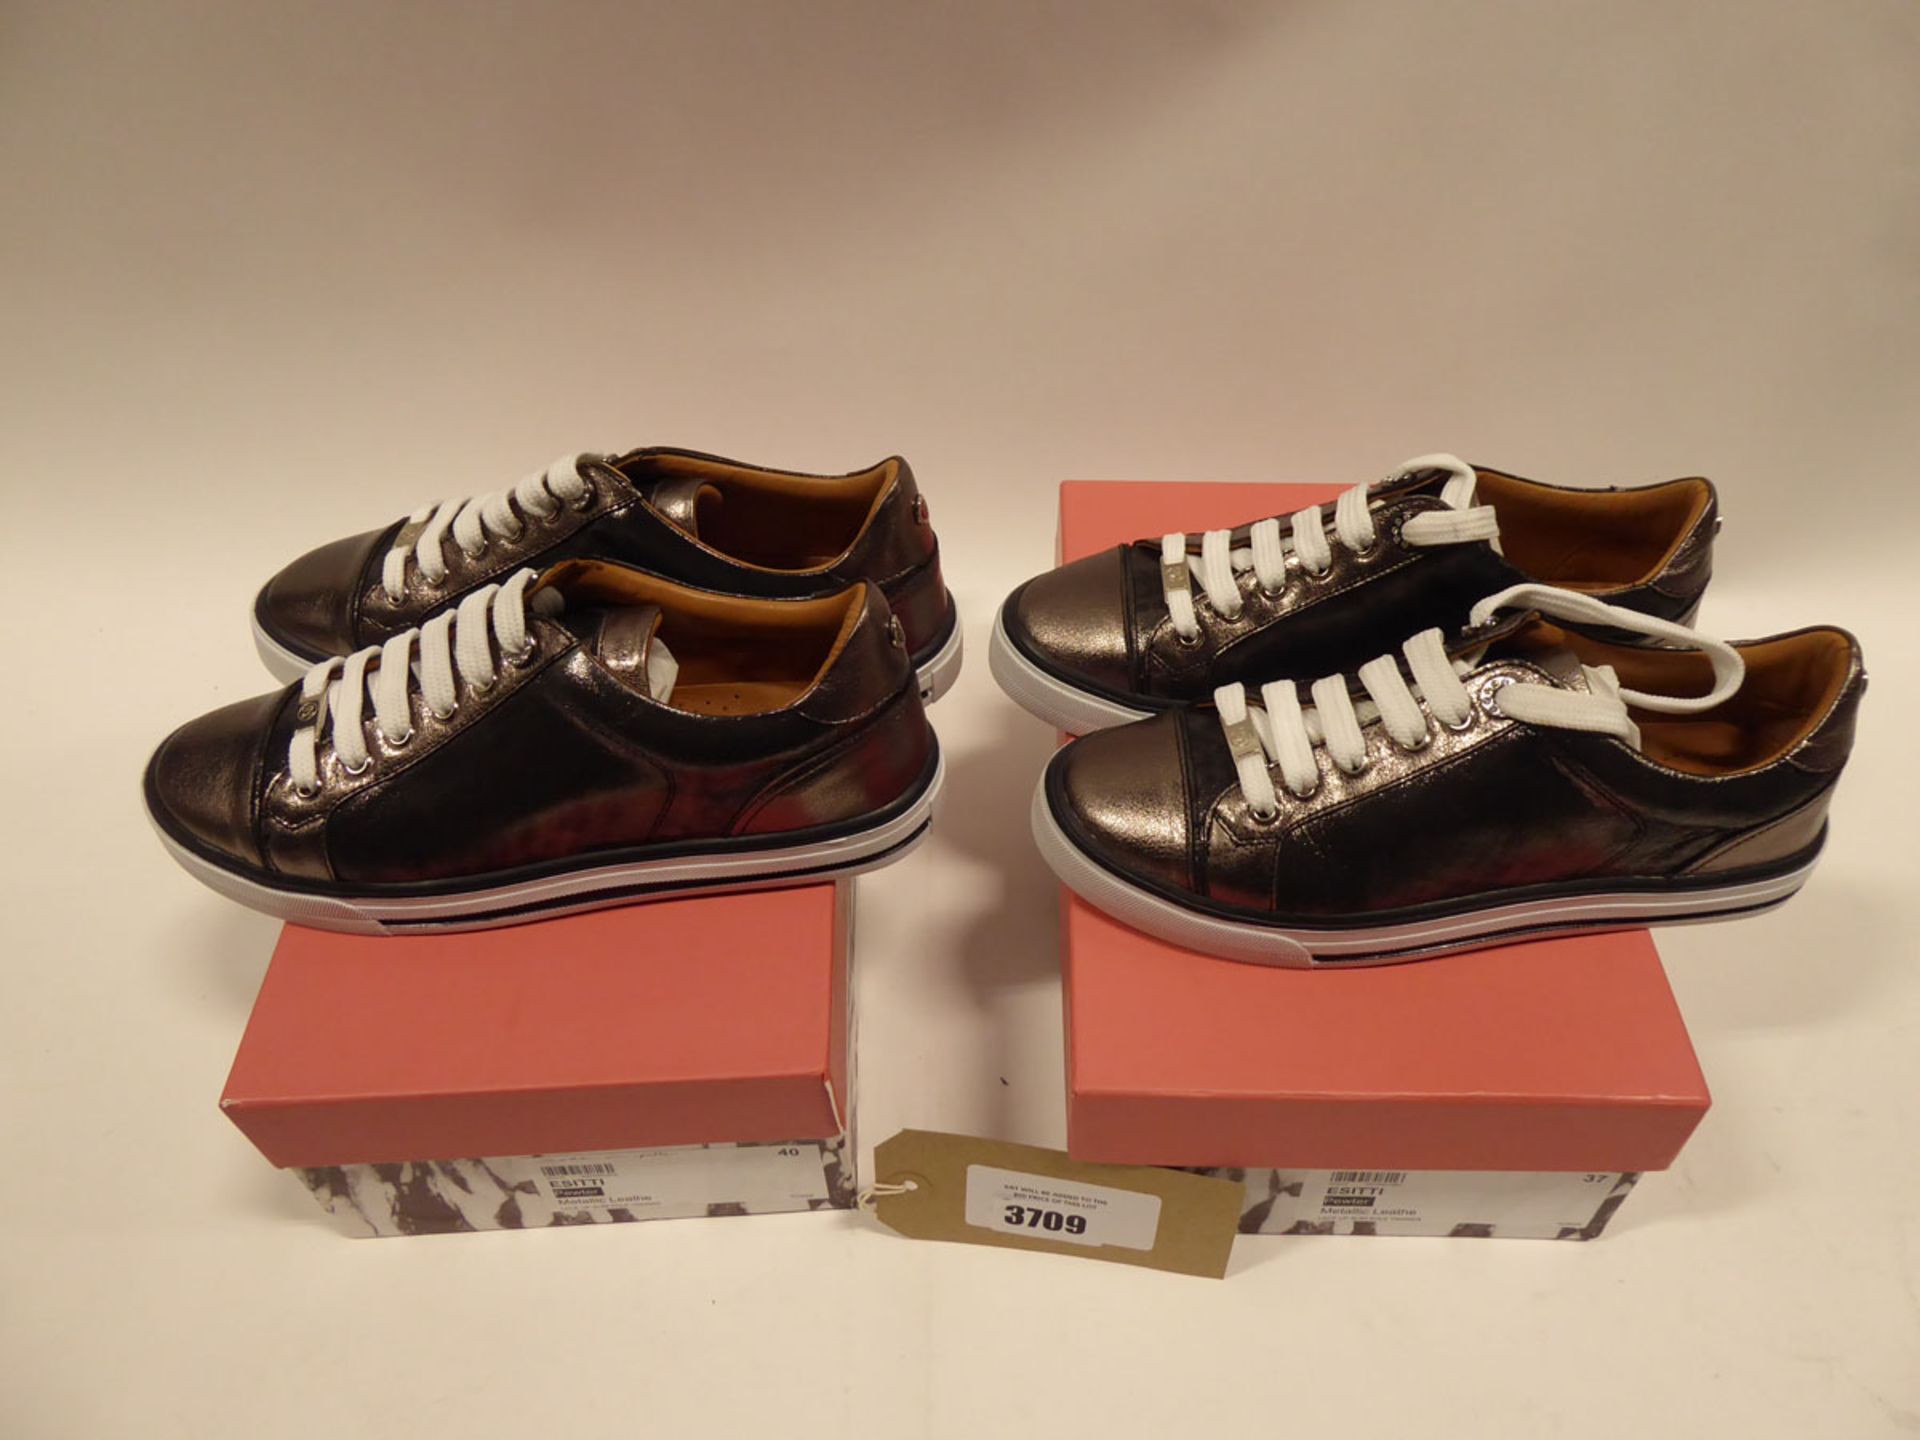 2 pairs of Moda in Pelle Esitti leather trainers sizes EI 40 and 37